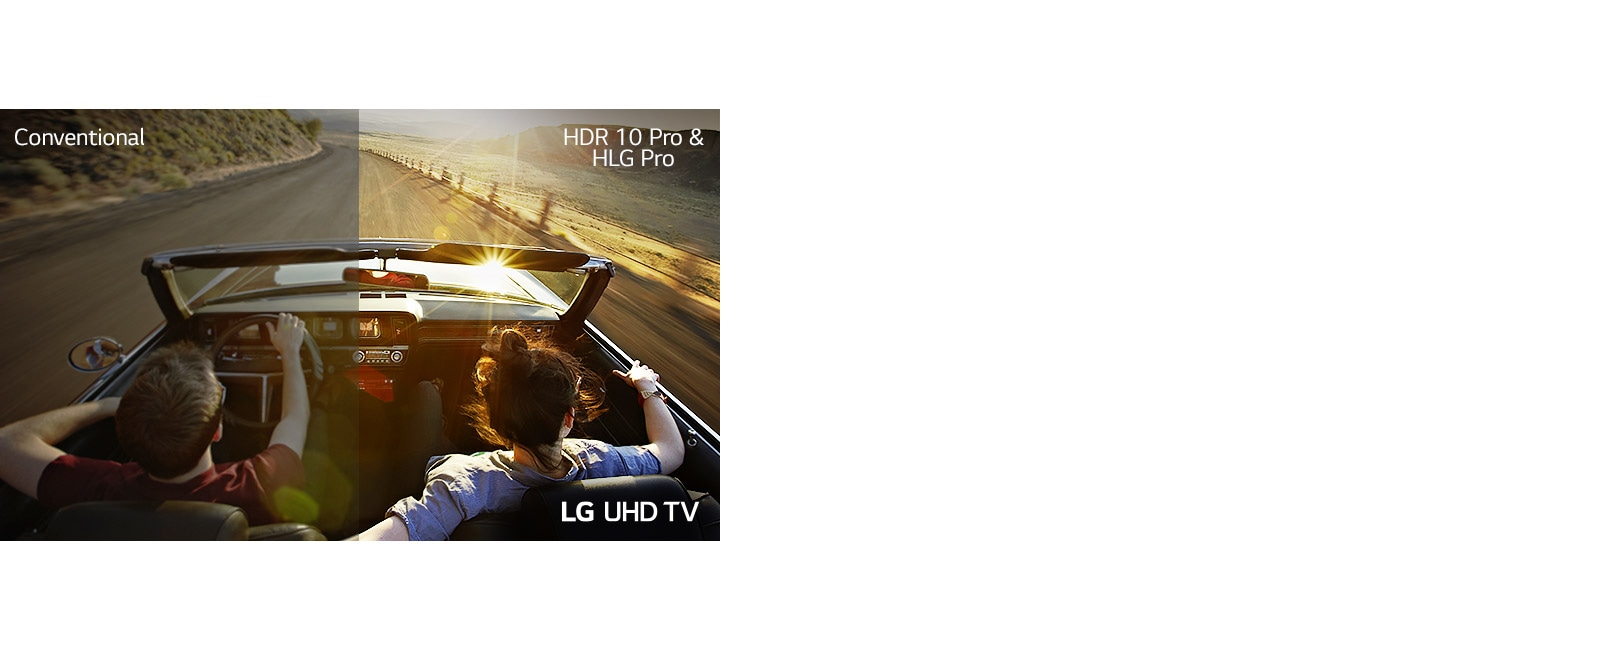 Split rear view of couple driving. Left shows conventional picture quality. Right shows LG UHD TV picture quality.